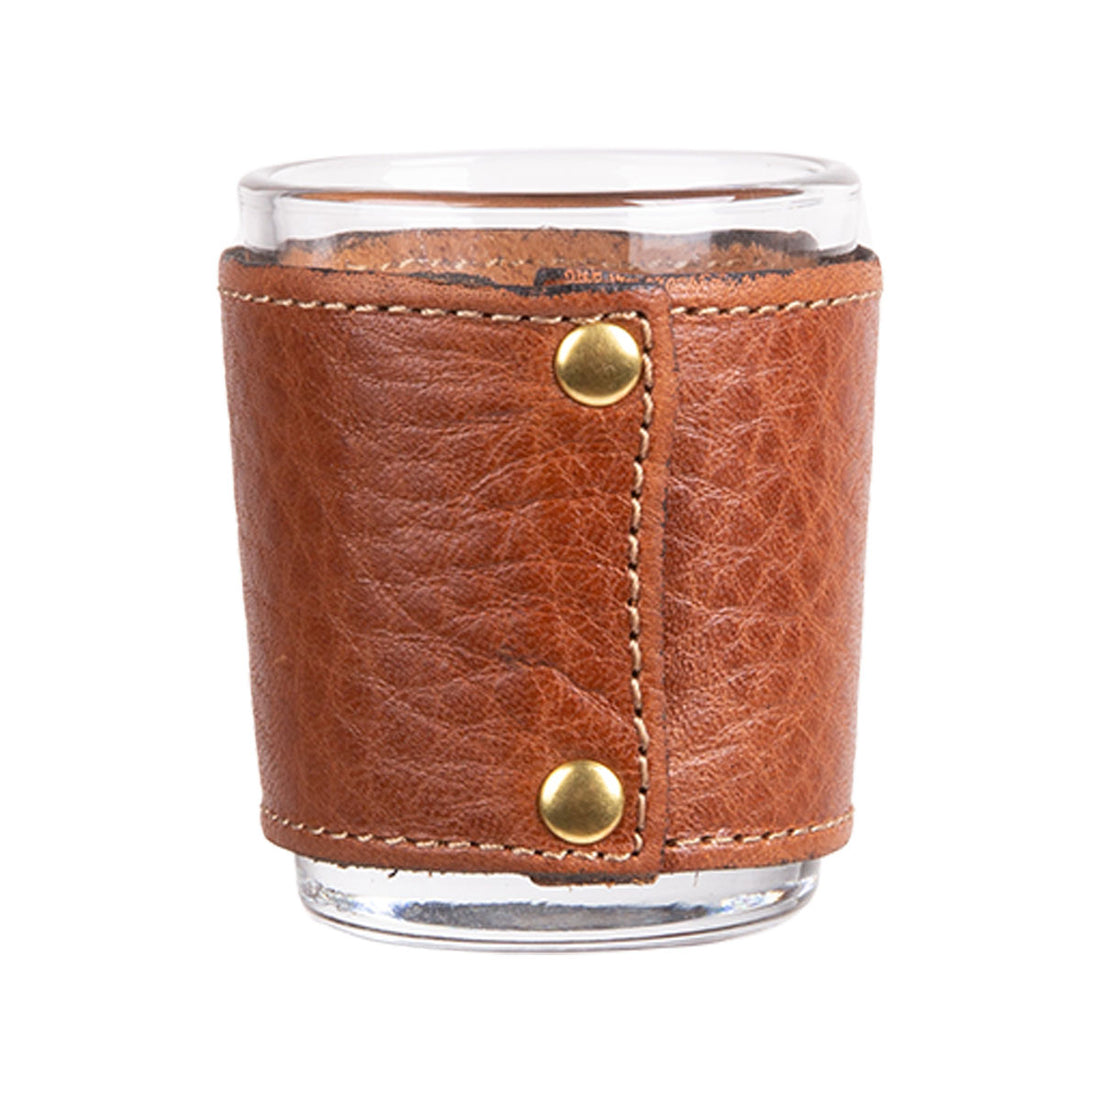 Clayton & Crume Keeneland Leather Wrapped Shot Glass